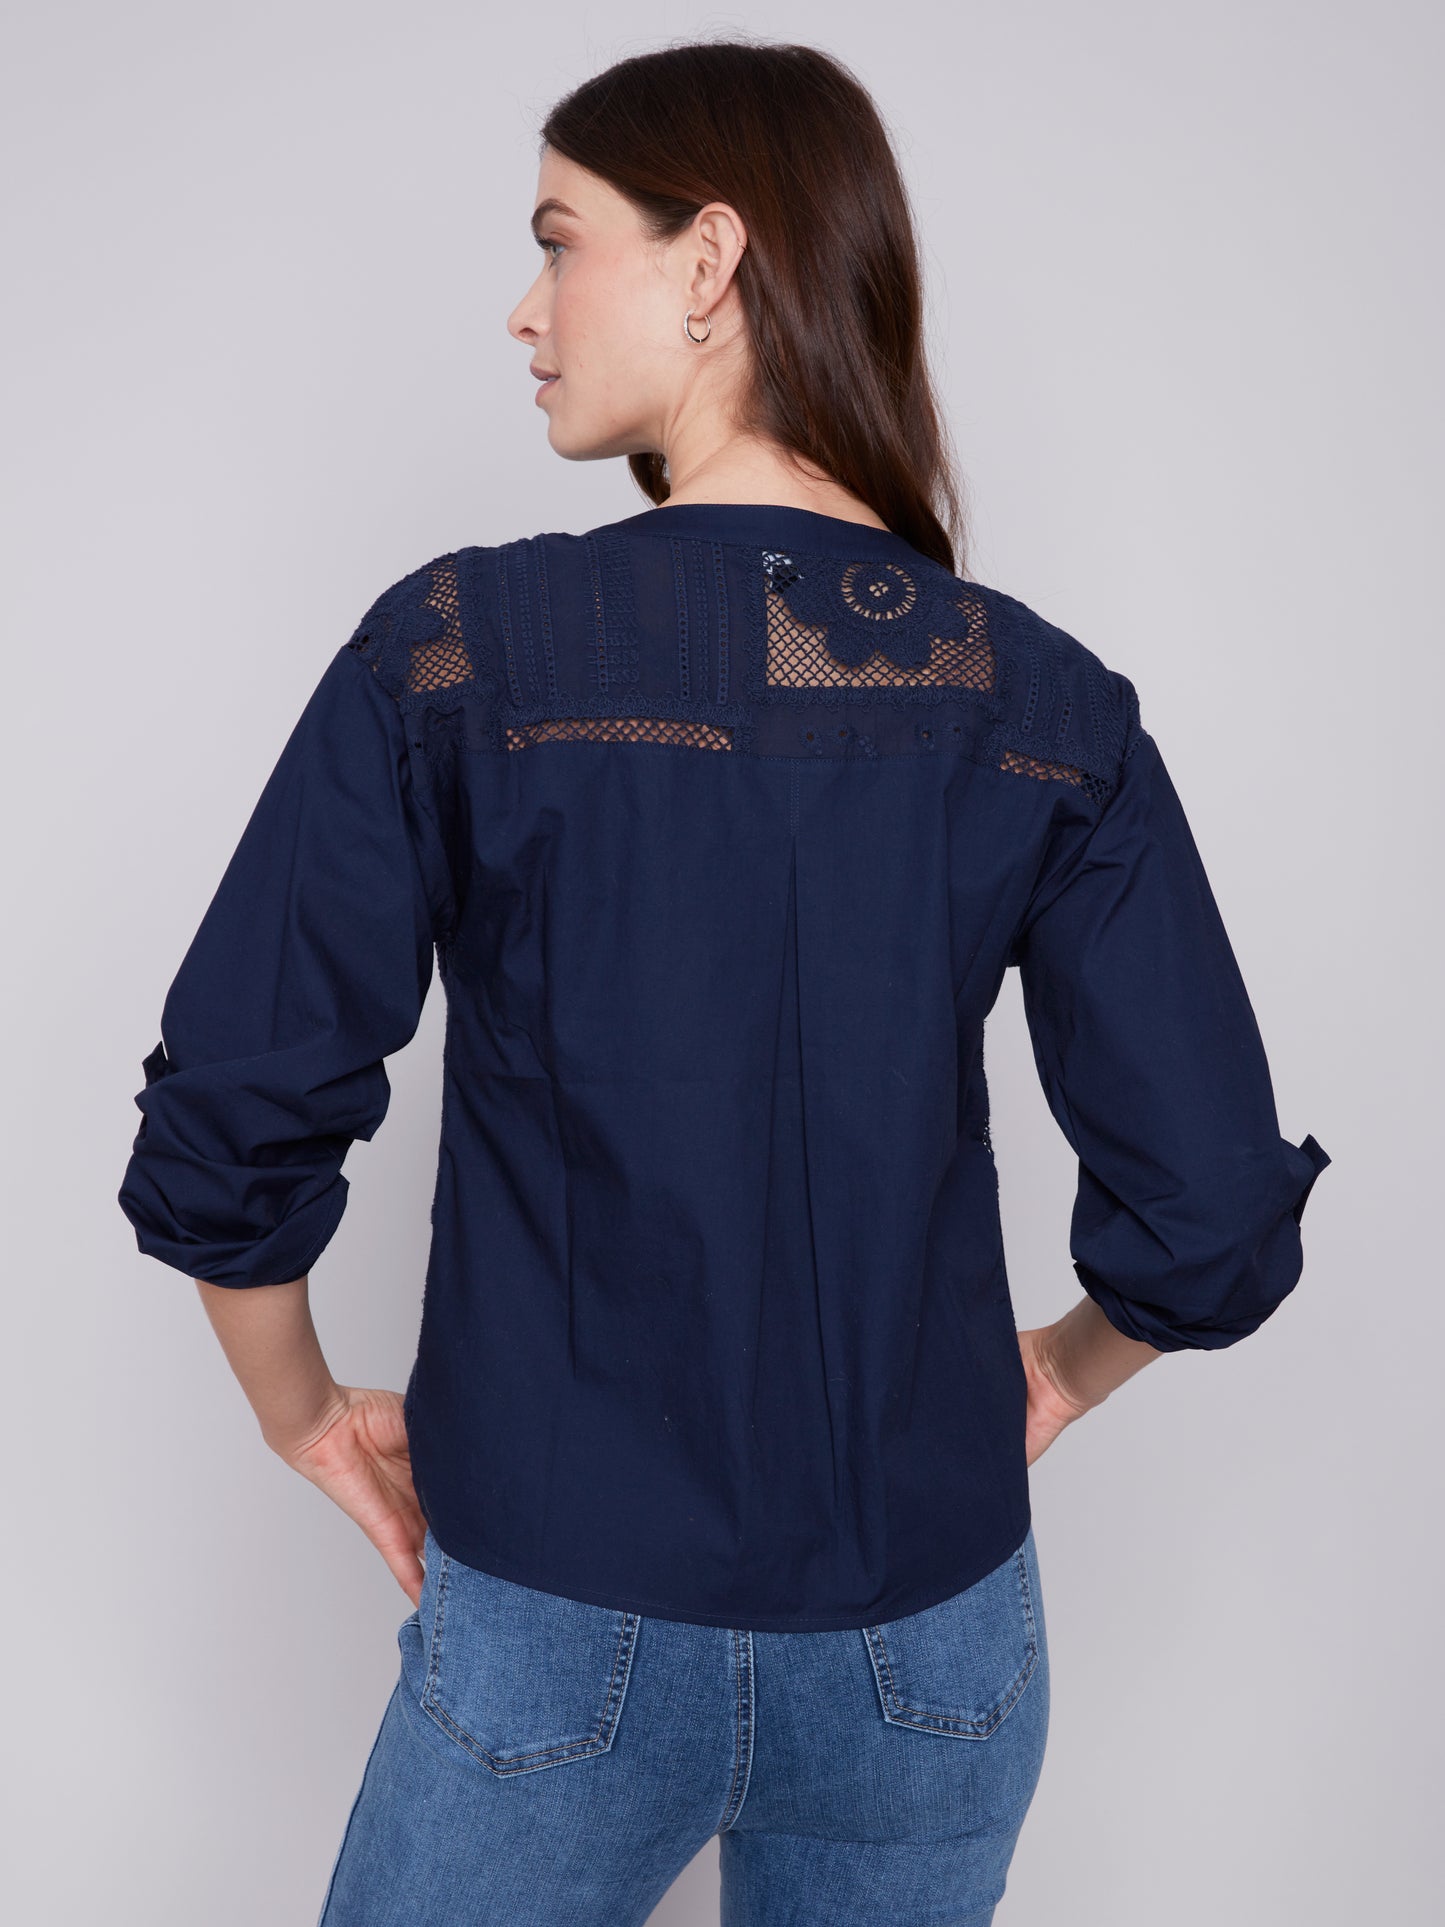 Long Sleeve Eyelet Shirt with Buttons in Marine Navy by Charlie B